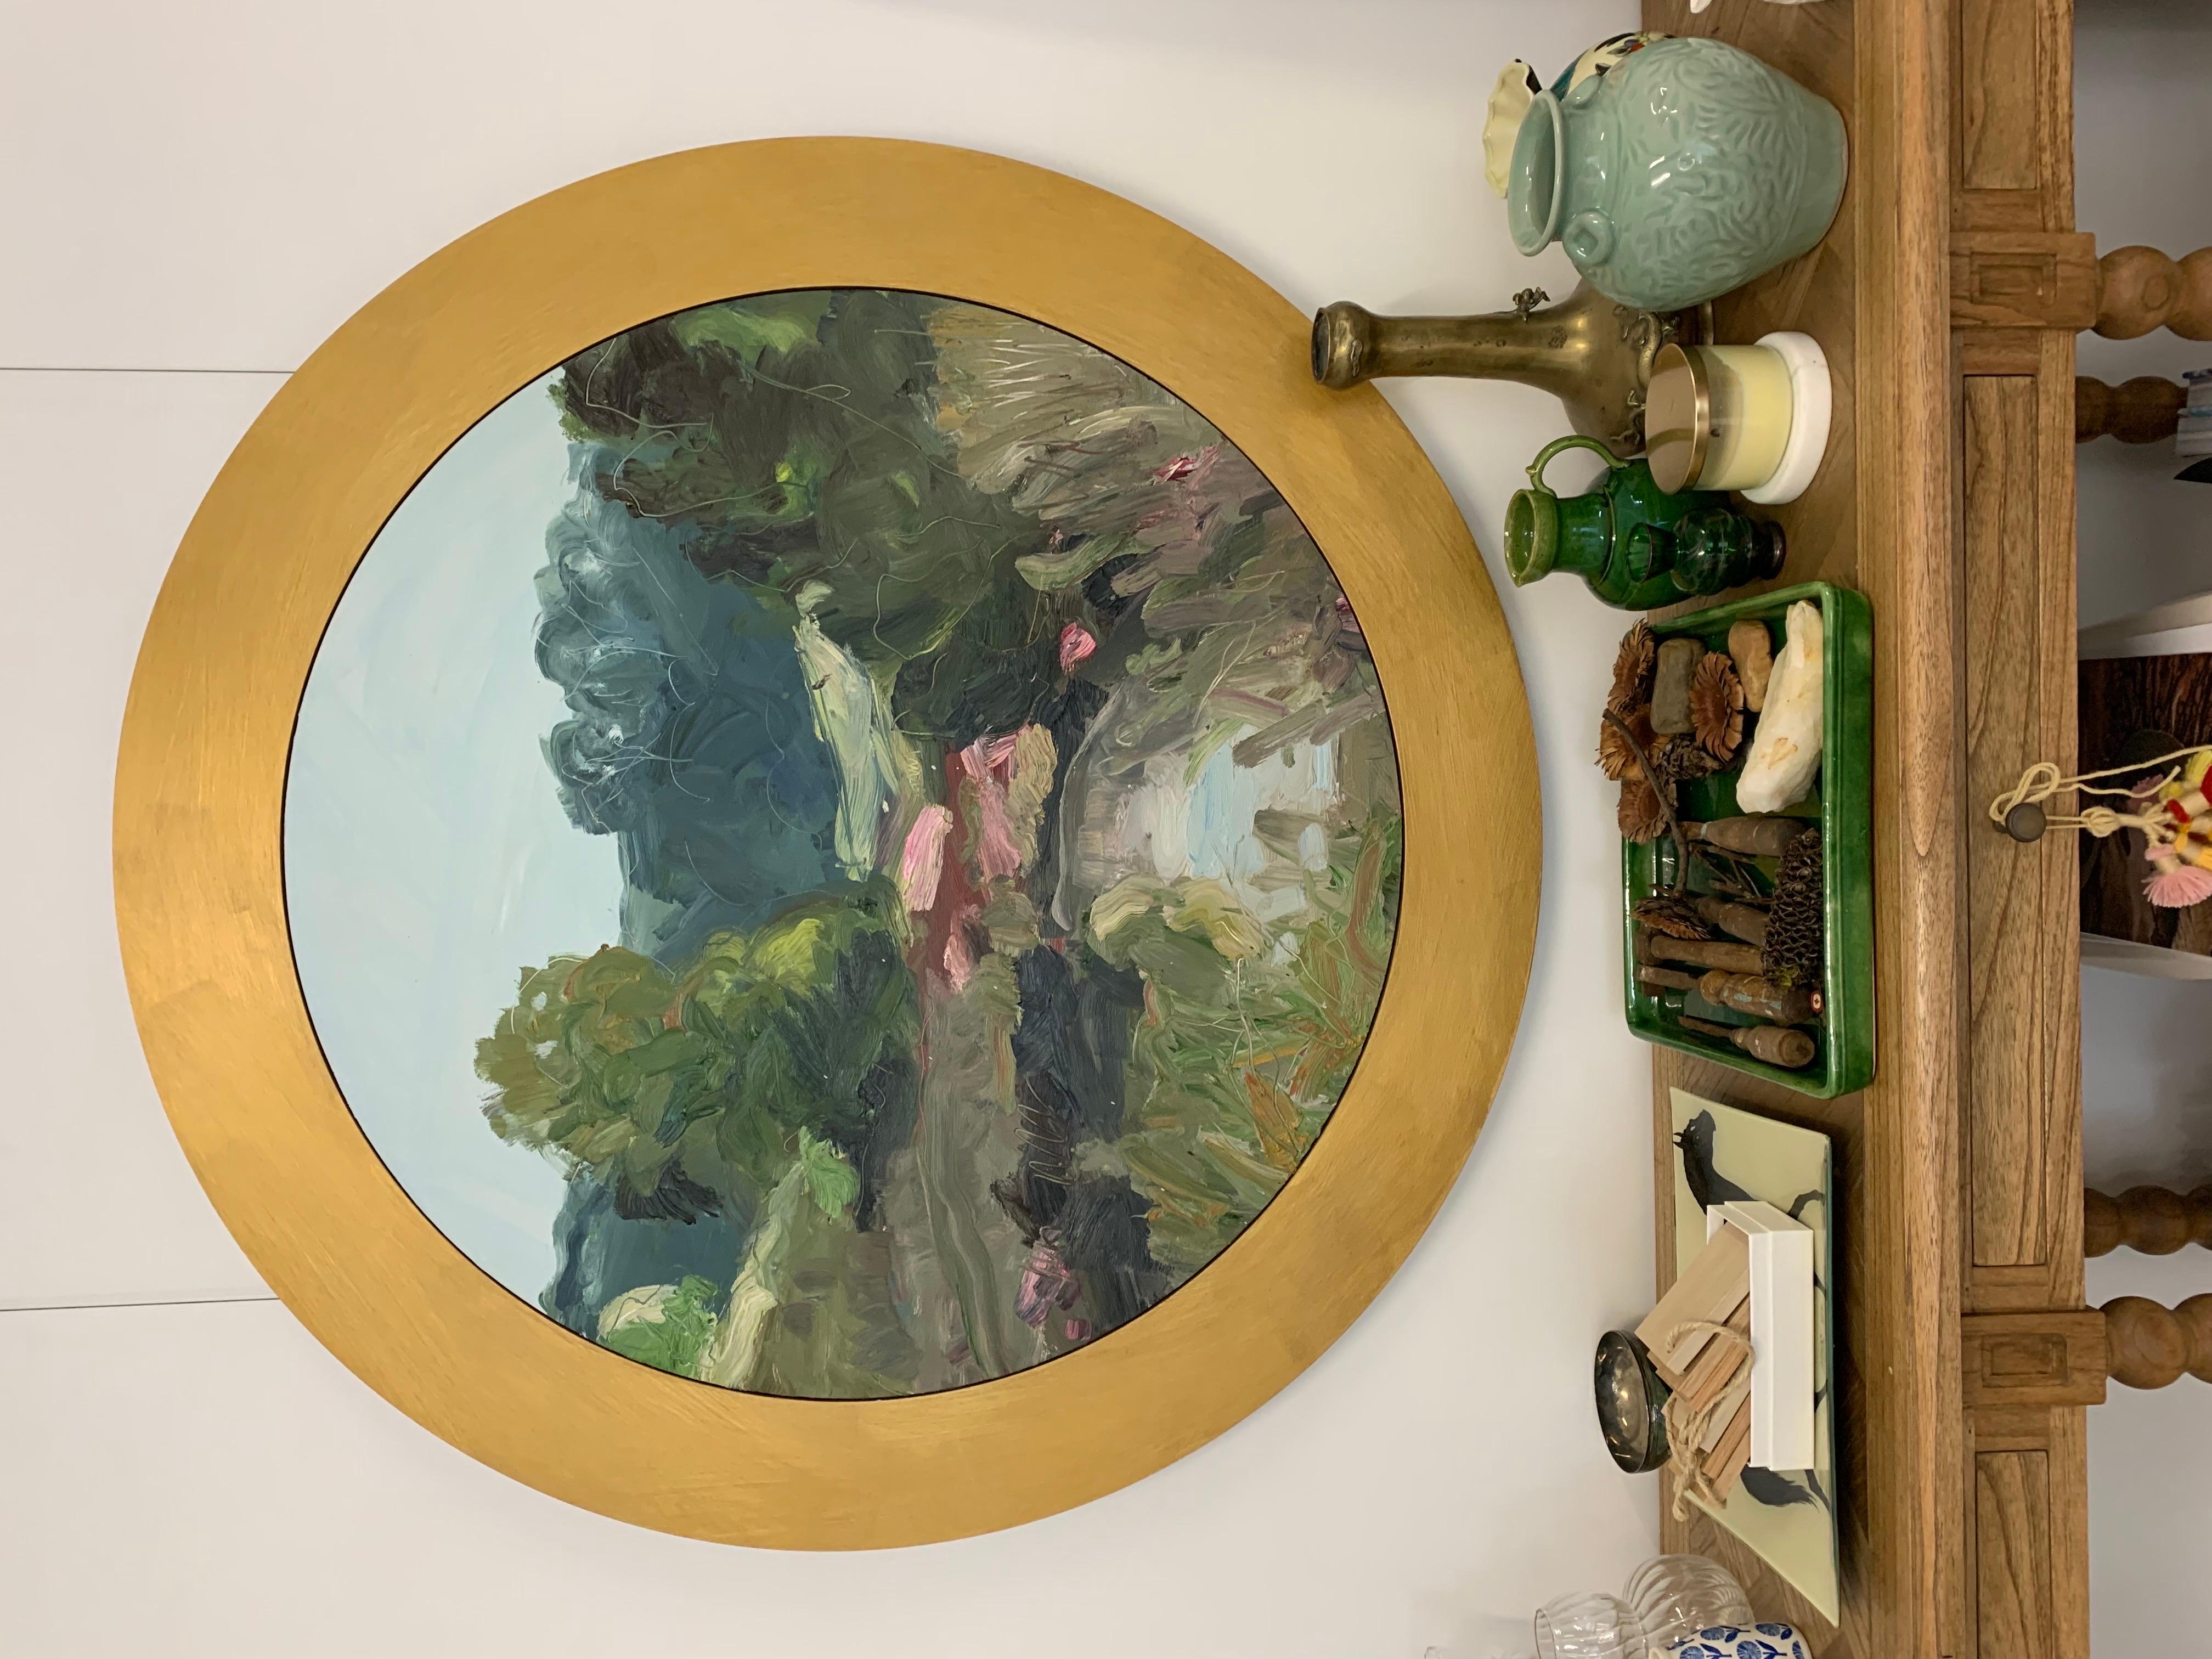 This work is an excellent example of the expressive, immediate style Leisl is known for. It was a finalist in the Clayton Utz Art Awards (Australia). The painting itself is 90cm diameter and the diameter with the frame is 116cm. The frame is